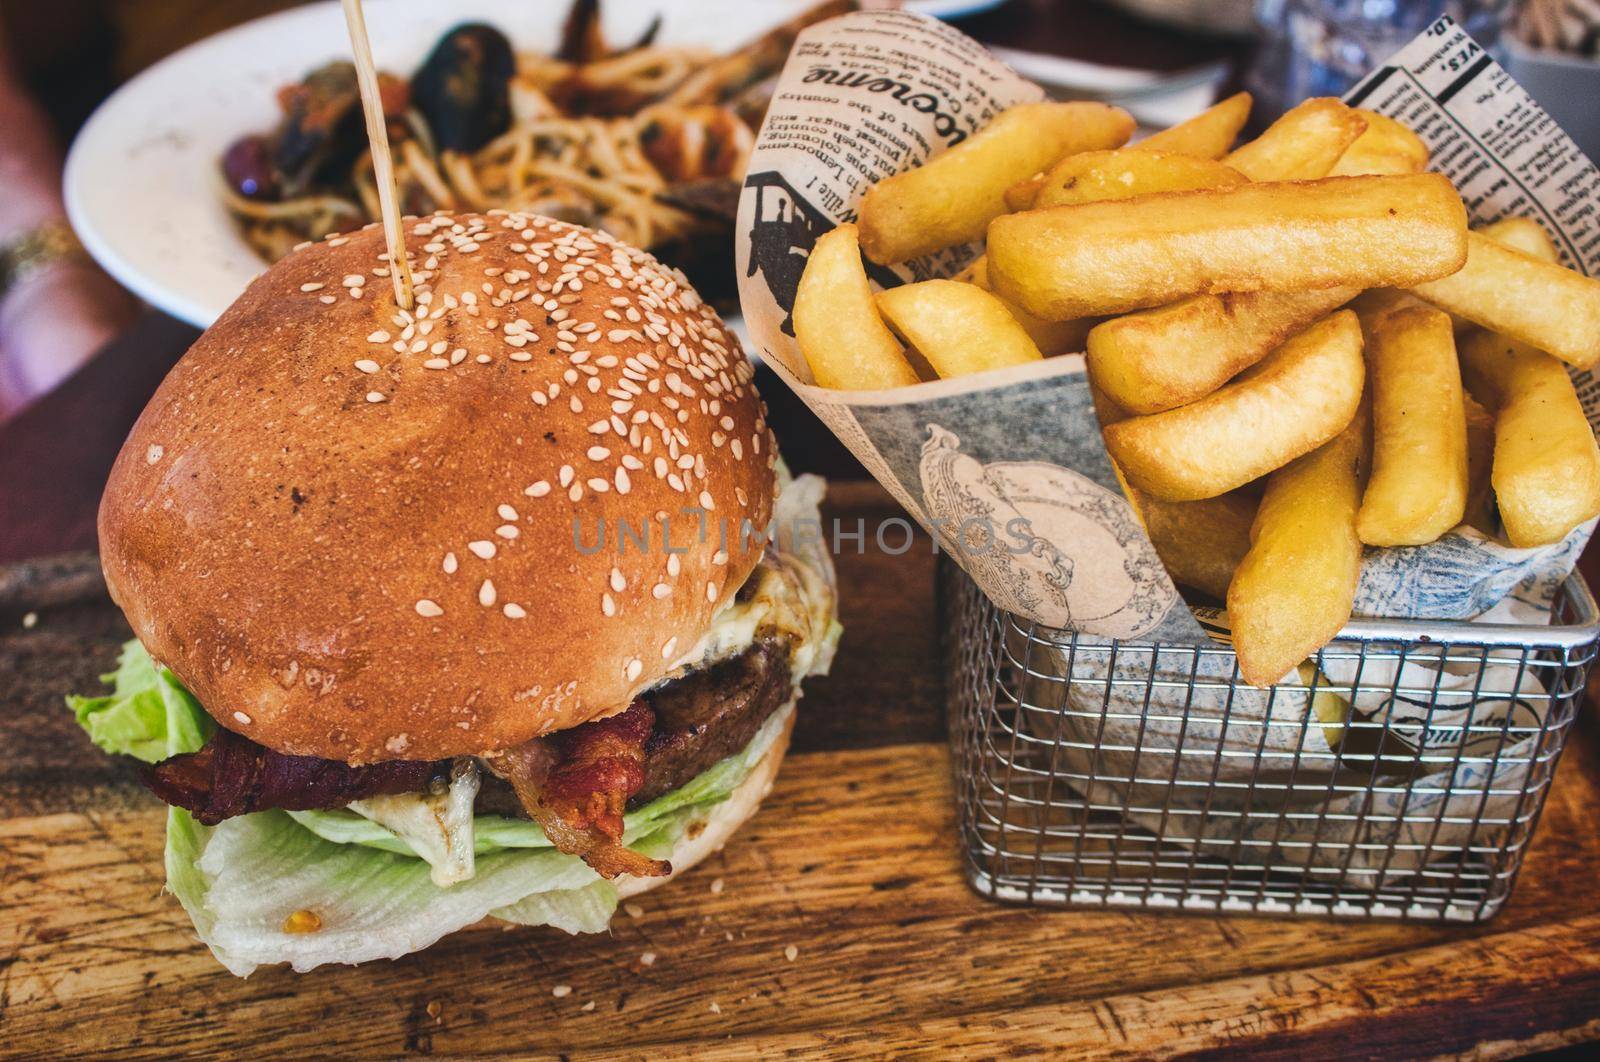 Burger and fries / chips in a basket on a wooden board in a restaurant